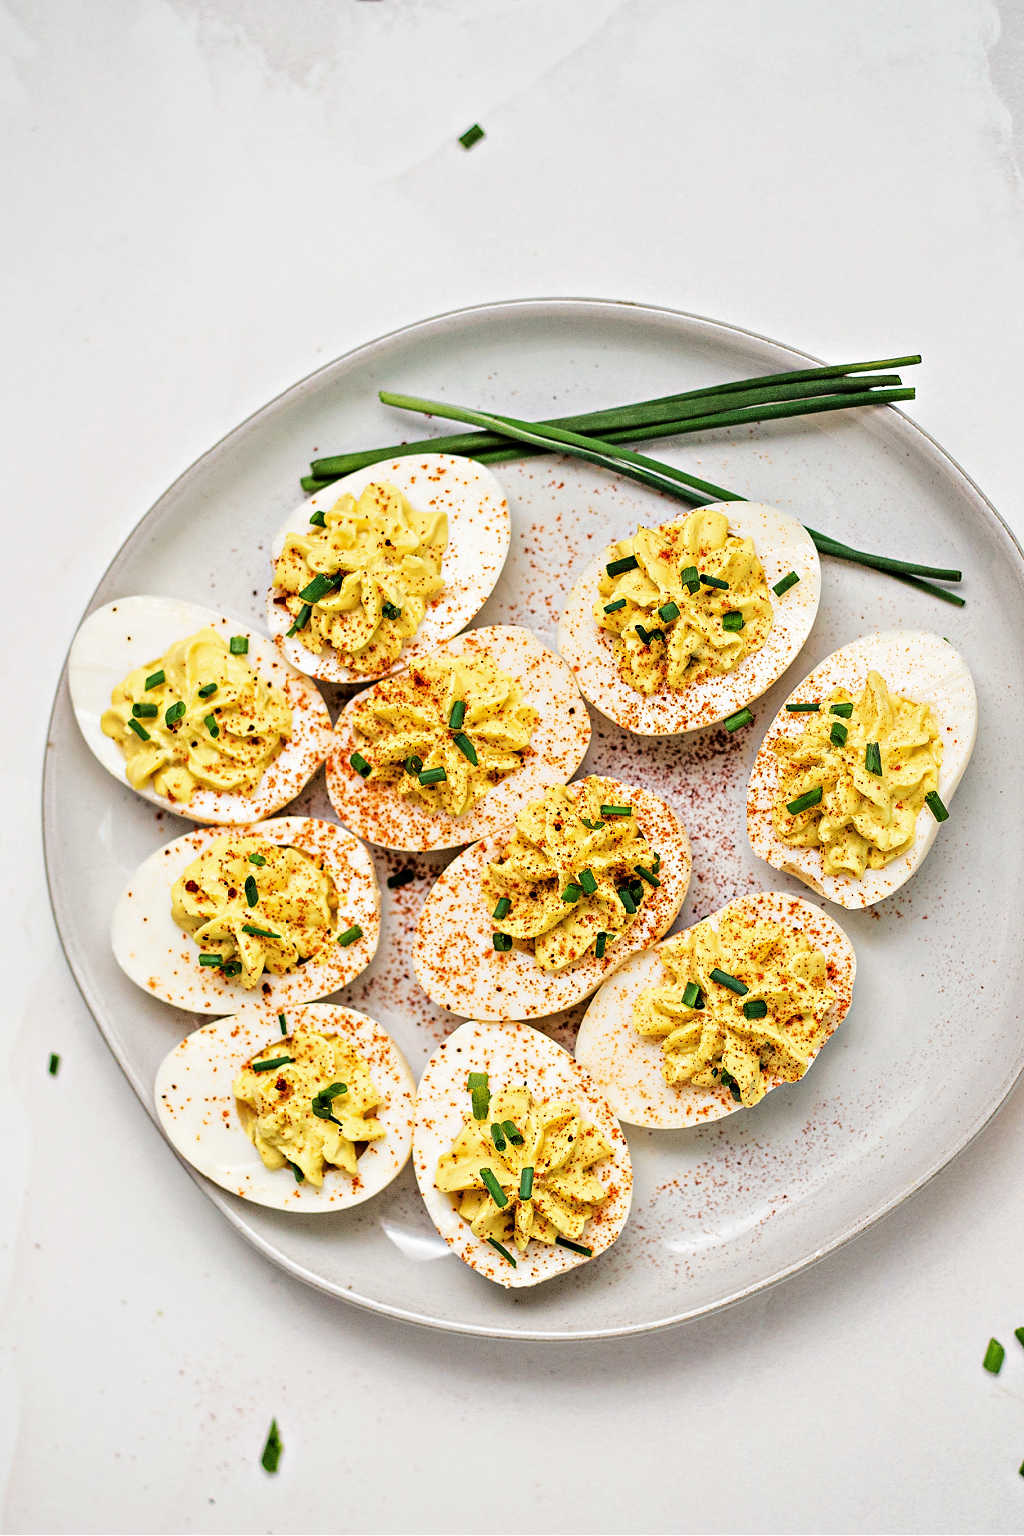 a plate of southern deviled eggs on a table garnished with paprika and chives.